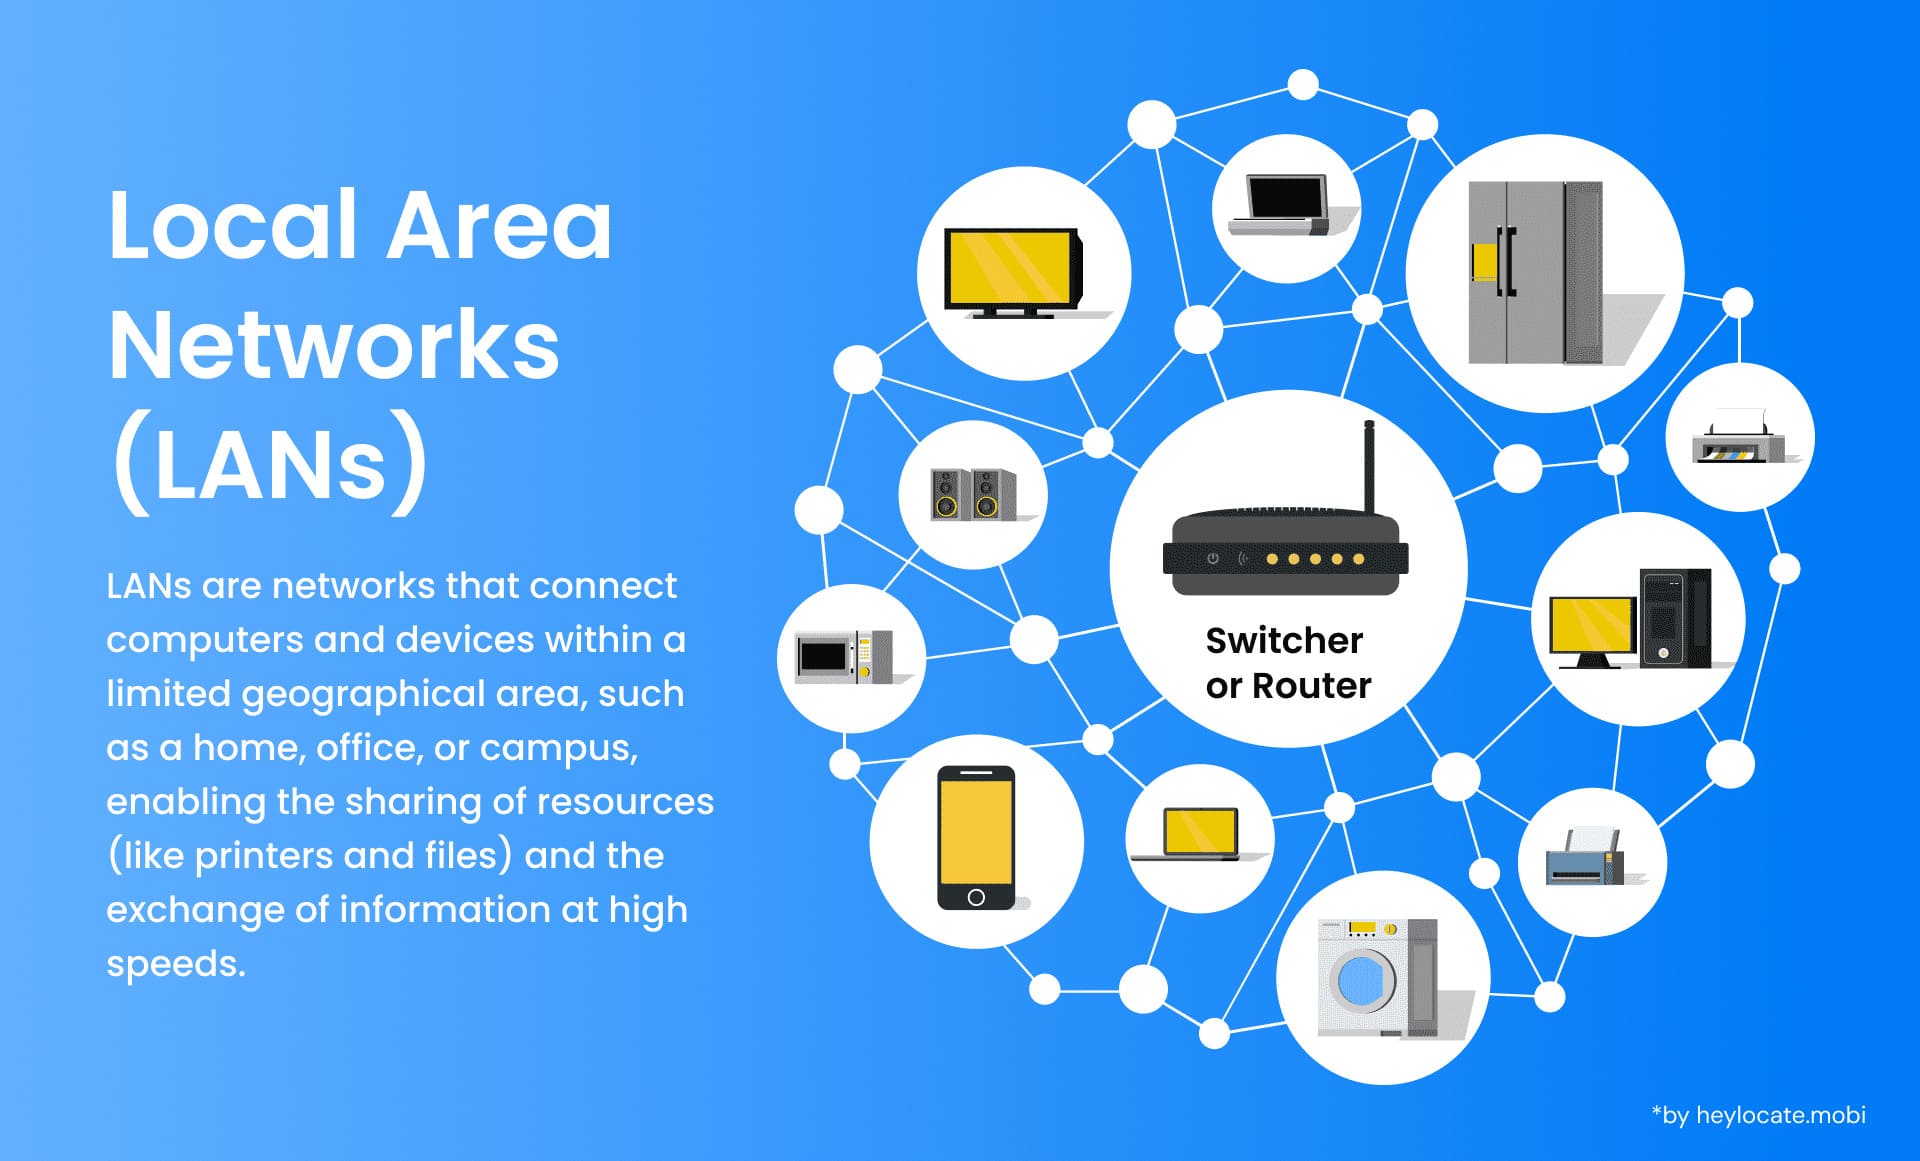 Graphic detailing what Local Area Networks (LANs) are, including a diagram showing various devices connected in a LAN, highlighting the central role of switches and routers